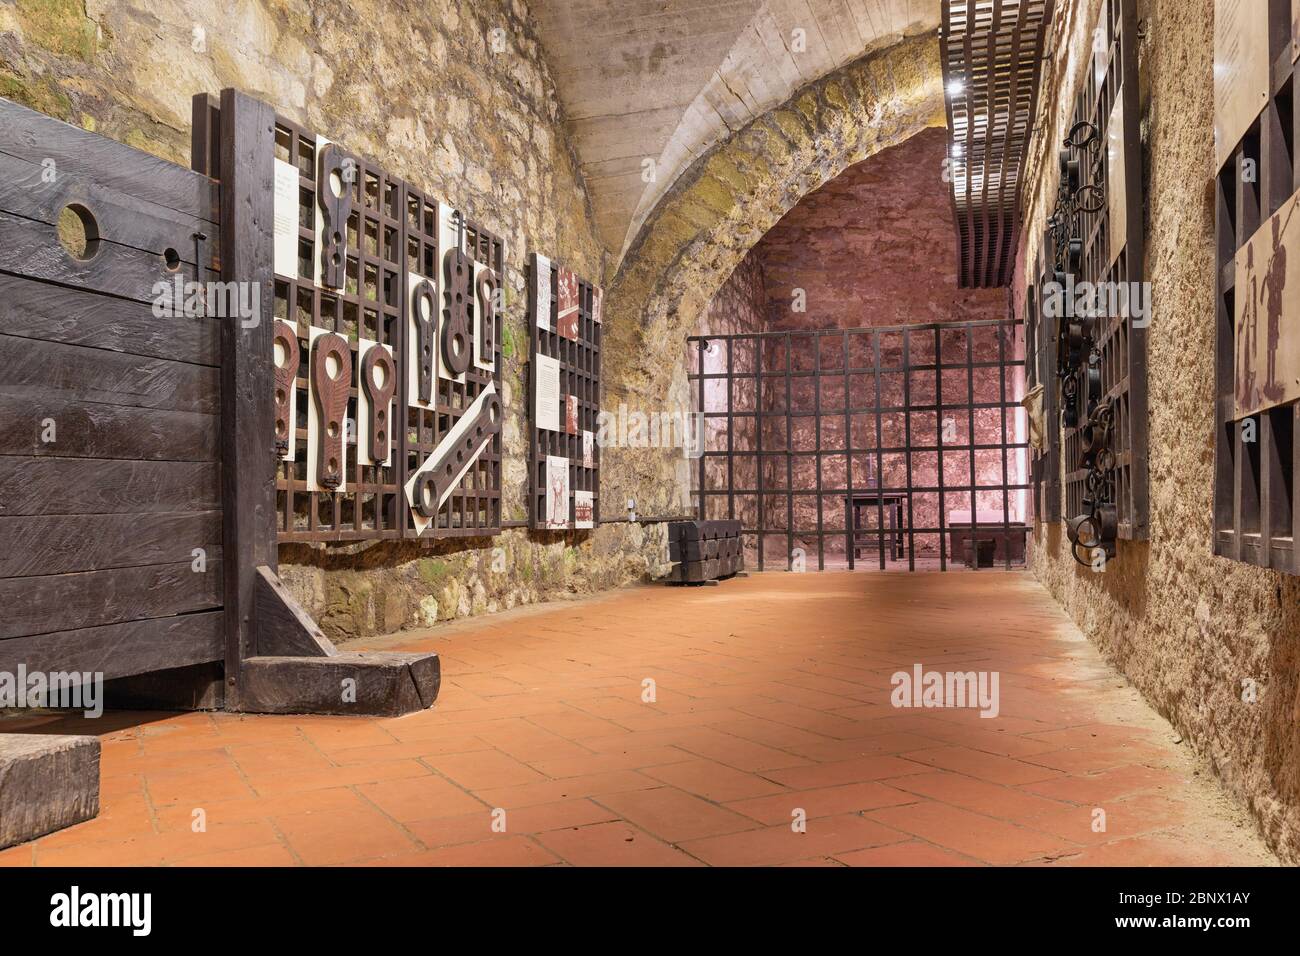 Torture chamber of Eger Castle in Hungary Stock Photo